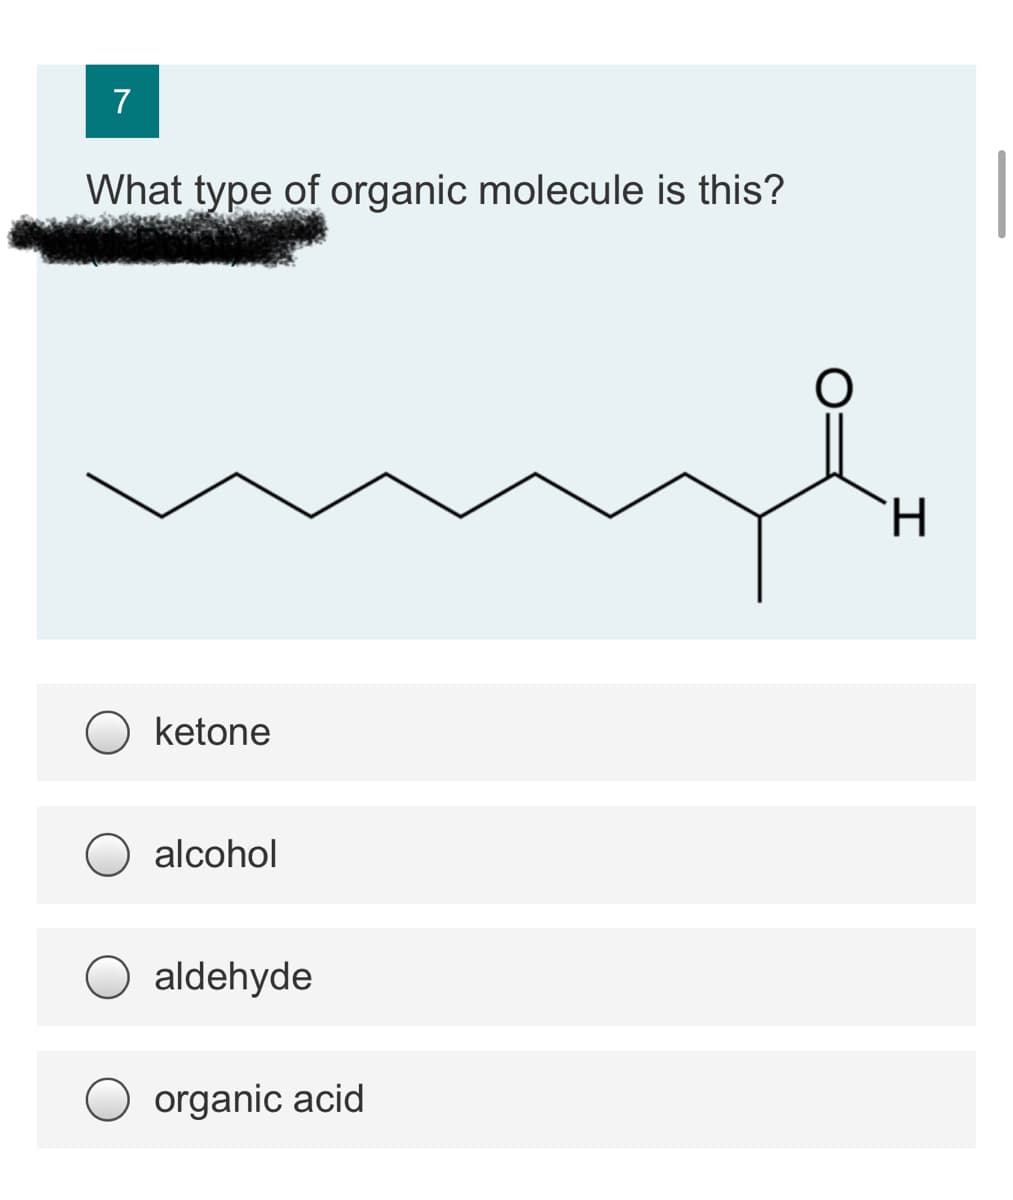 7
What type of organic molecule is this?
H.
ketone
alcohol
aldehyde
O organic acid
